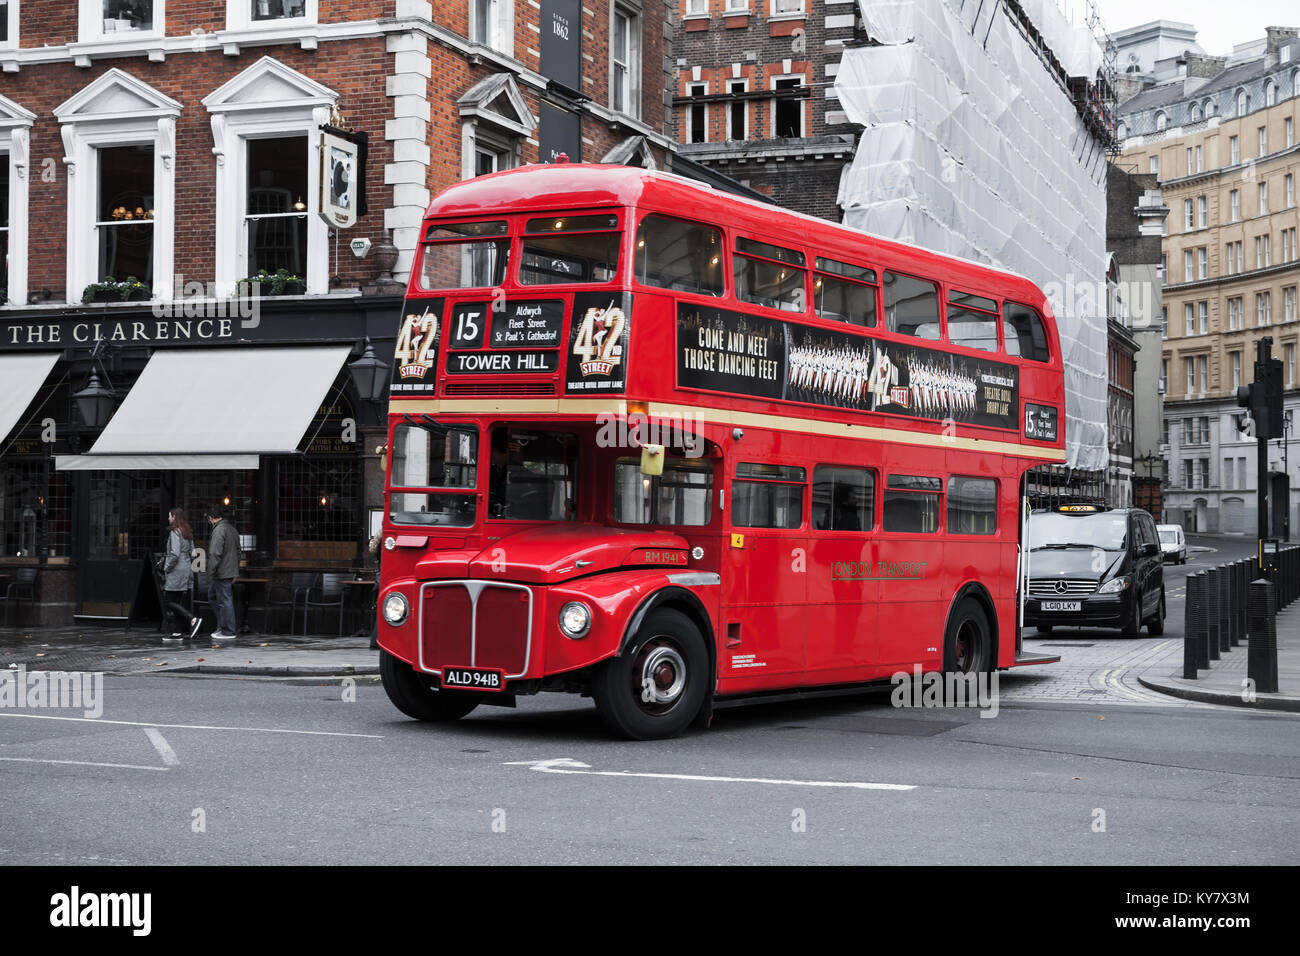 London, United Kingdom - October 21, 2017: Red double-decker bus goes on the street, one of the most popular symbols of the city. Ordinary people walk Stock Photo